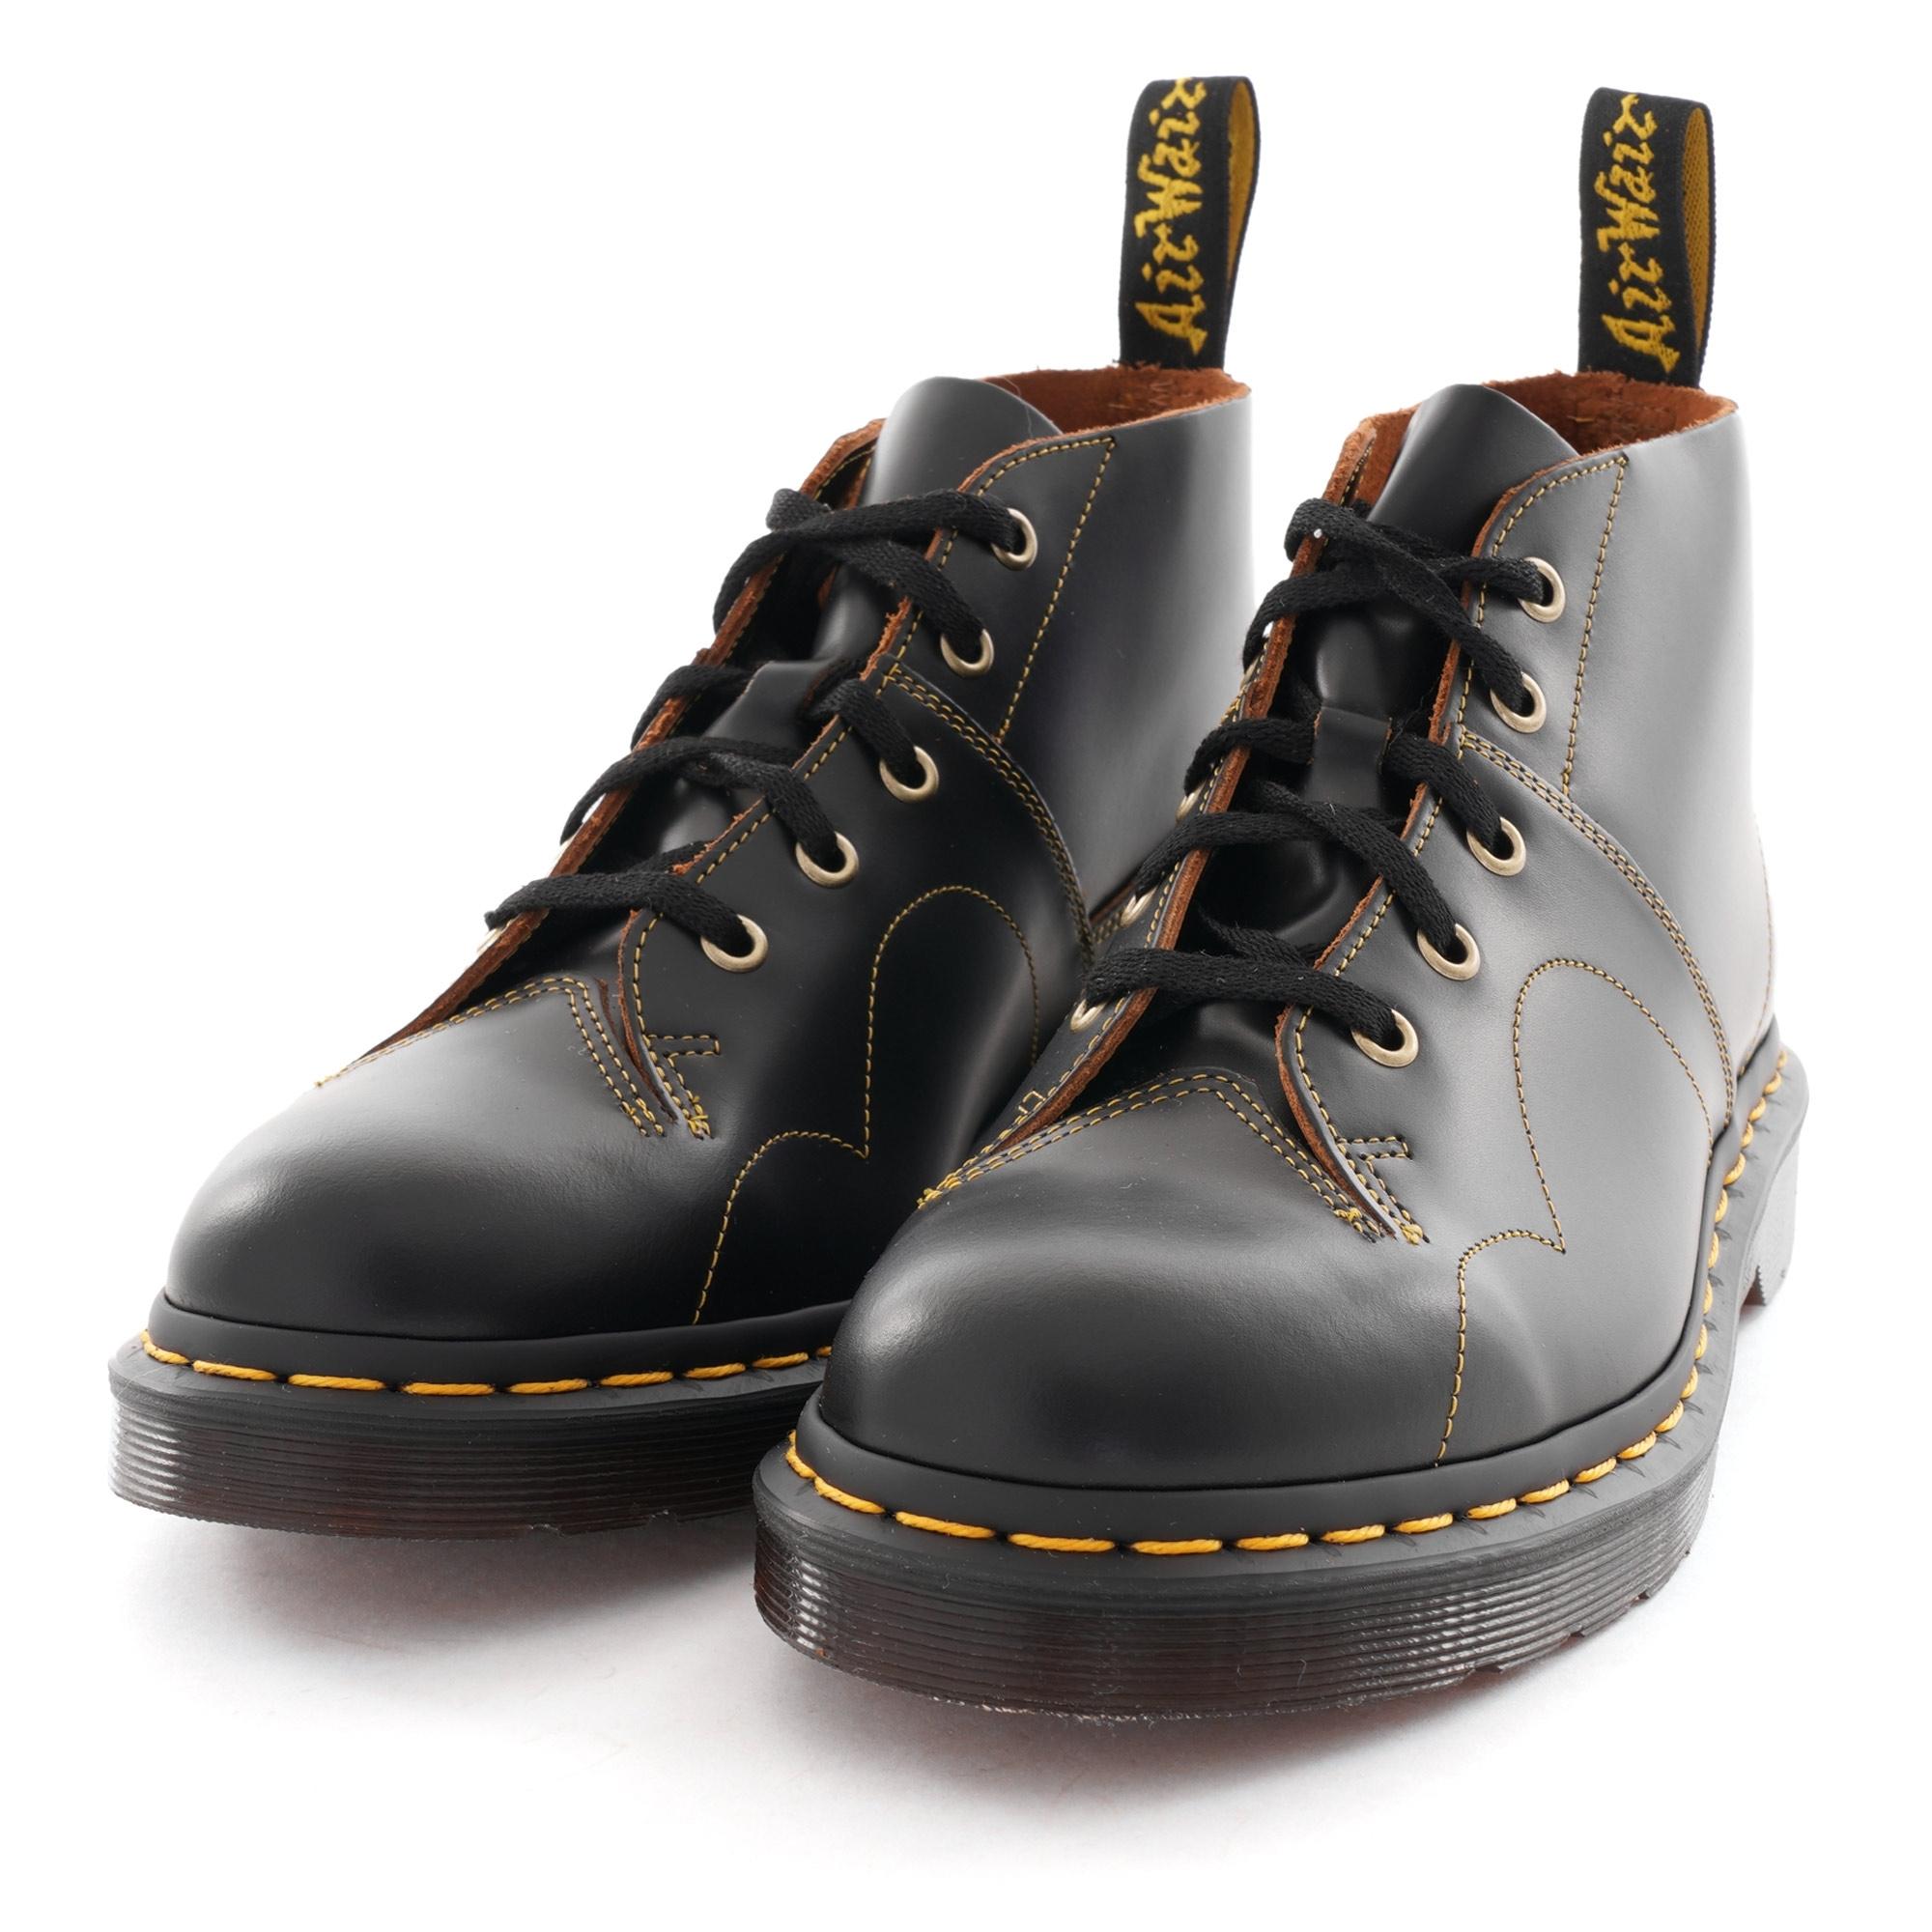 Dr. Martens Church Leather Monkey Boots in Black for Men - Lyst